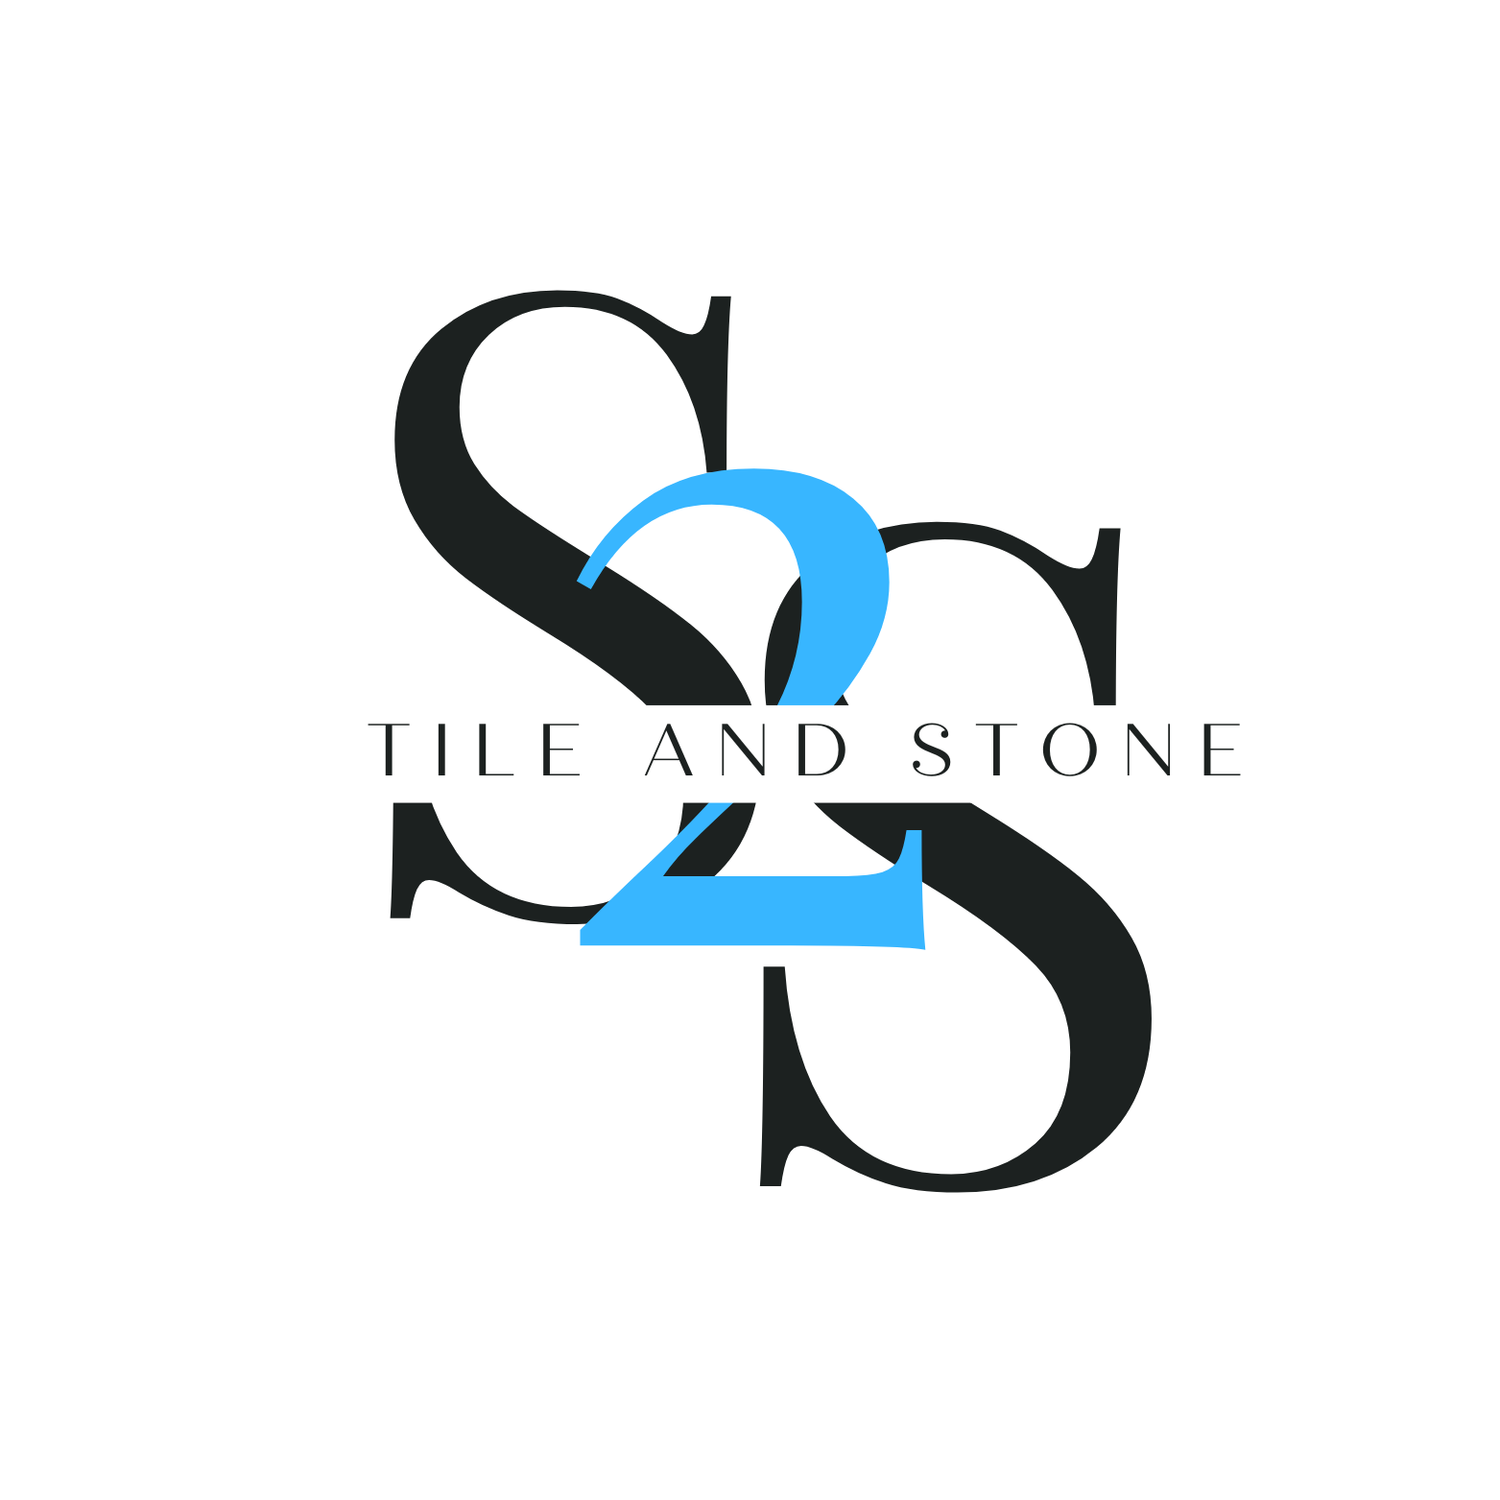 S2S Tile and Stone